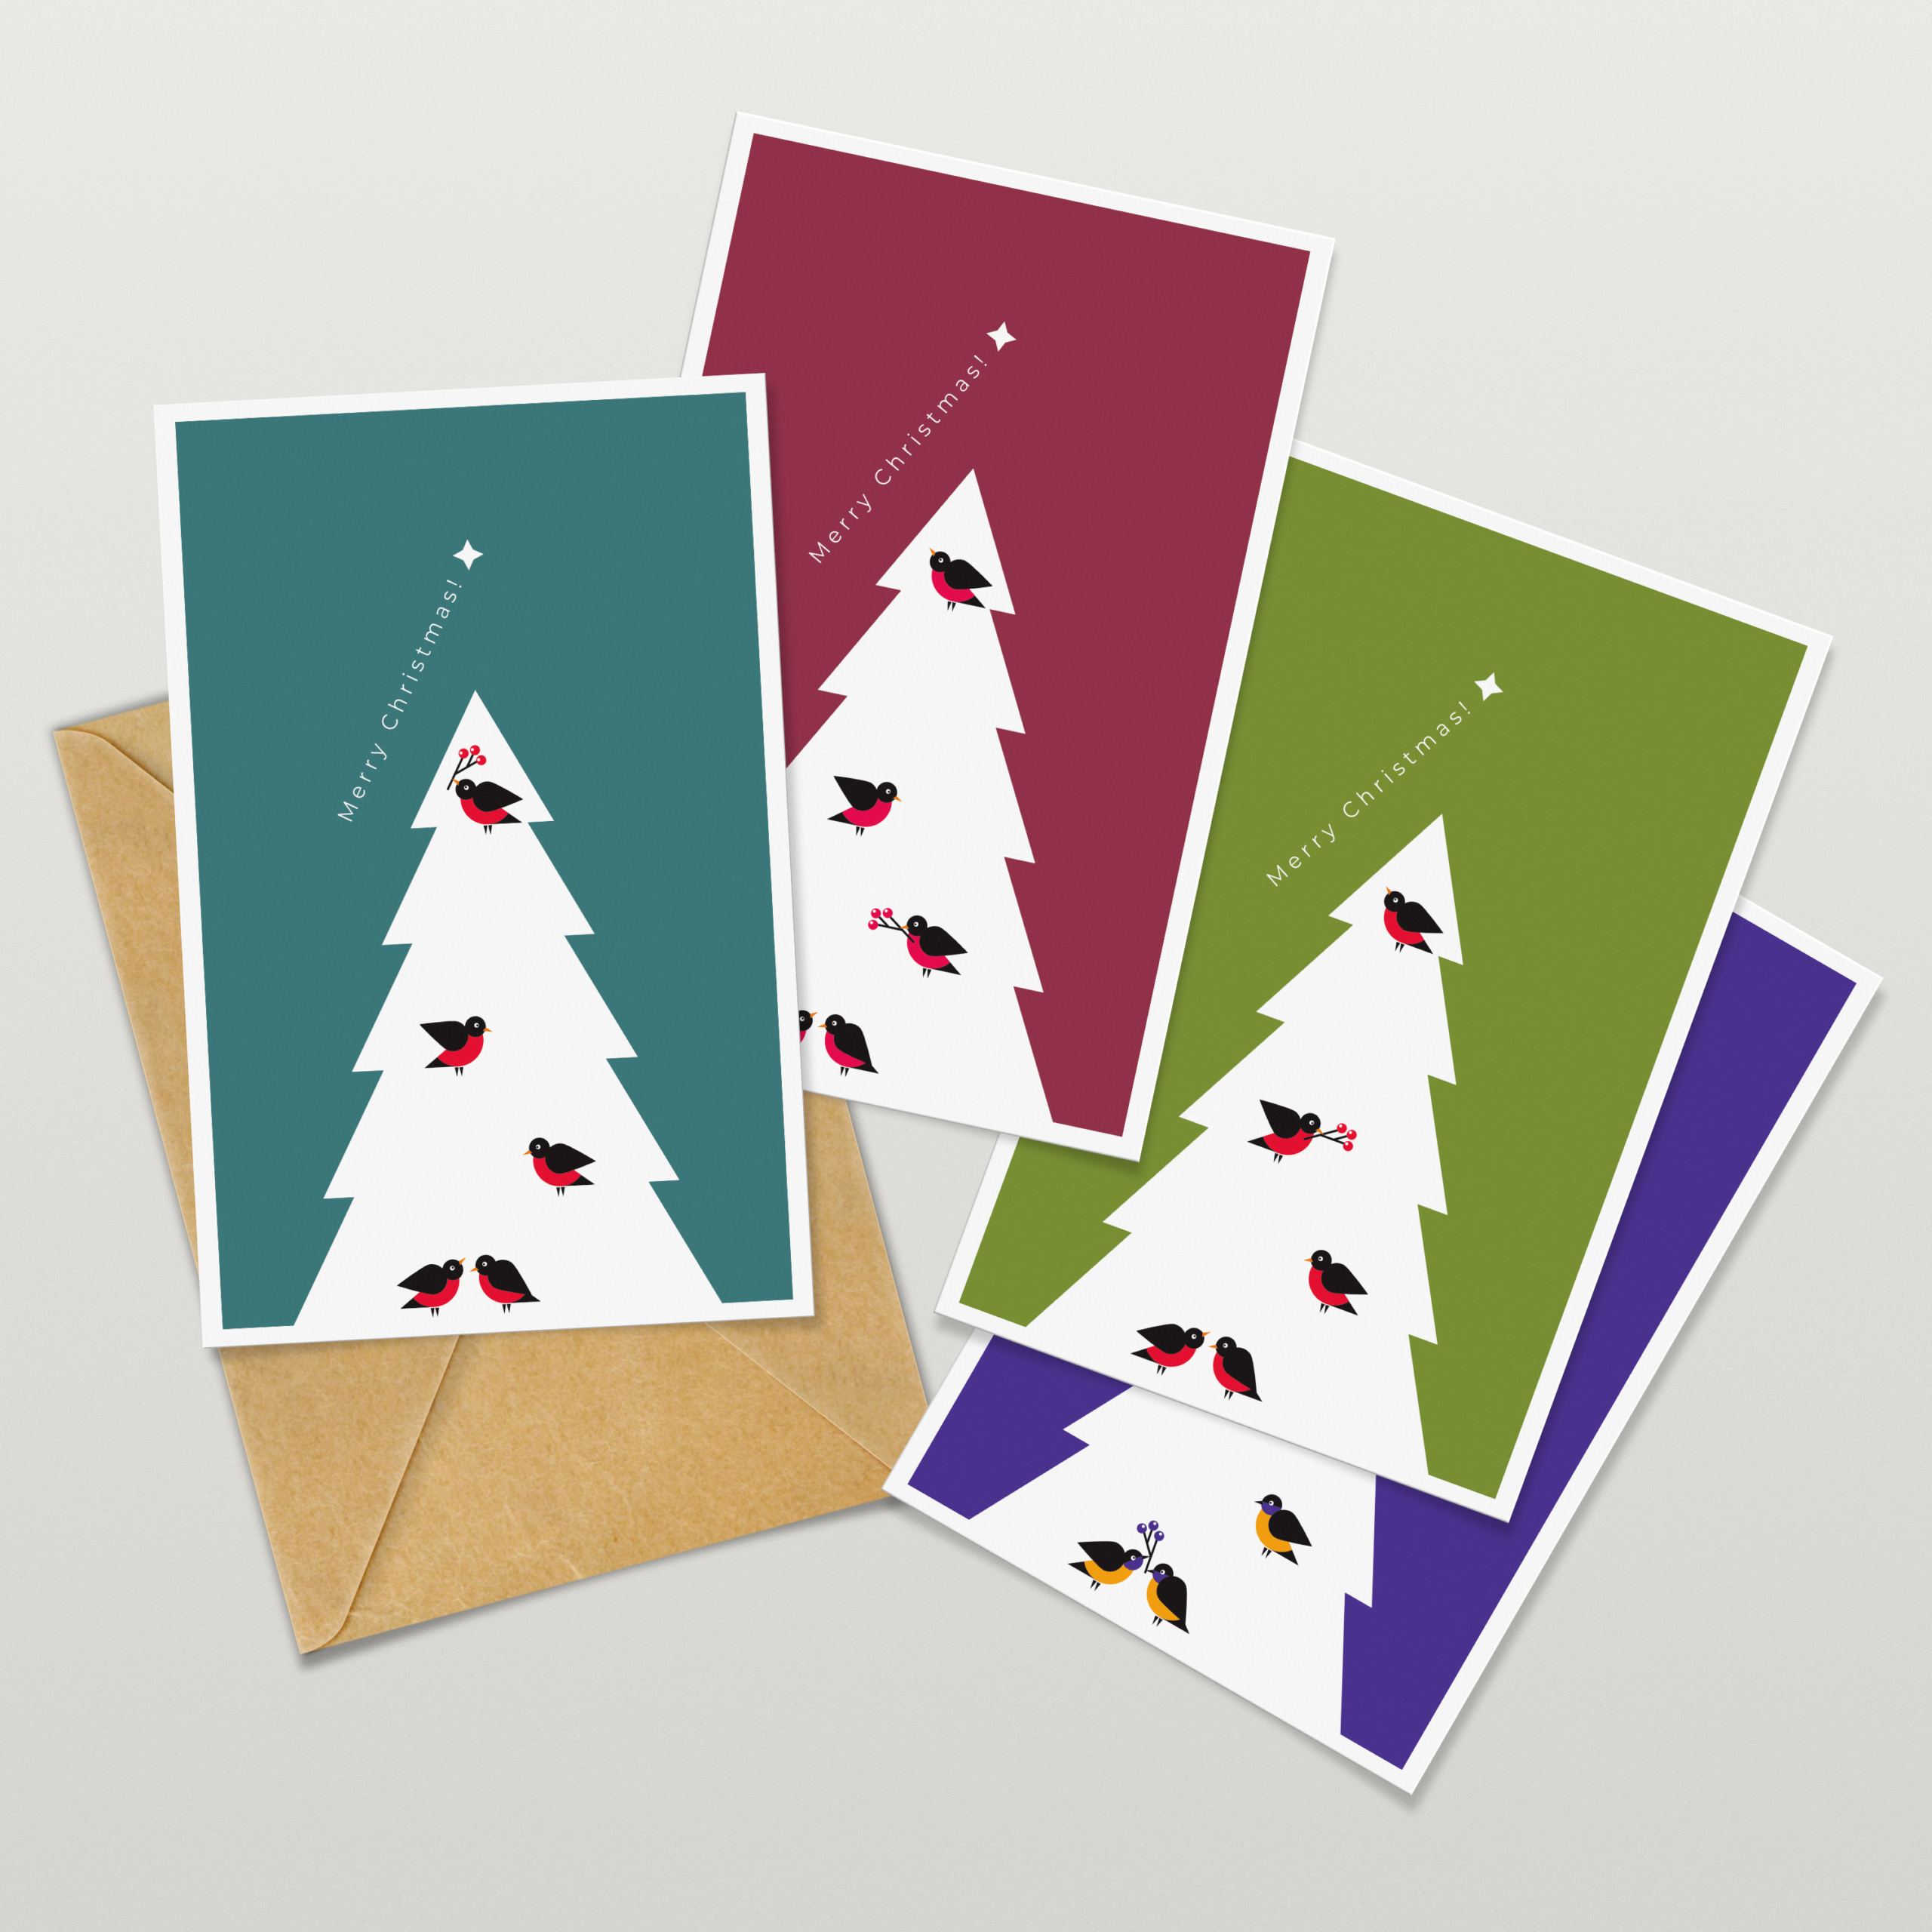 Excellent Quality 'CHILD'S PLAY' 10 CUTE CHRISTMAS CARDS WITH ENVELOPES 